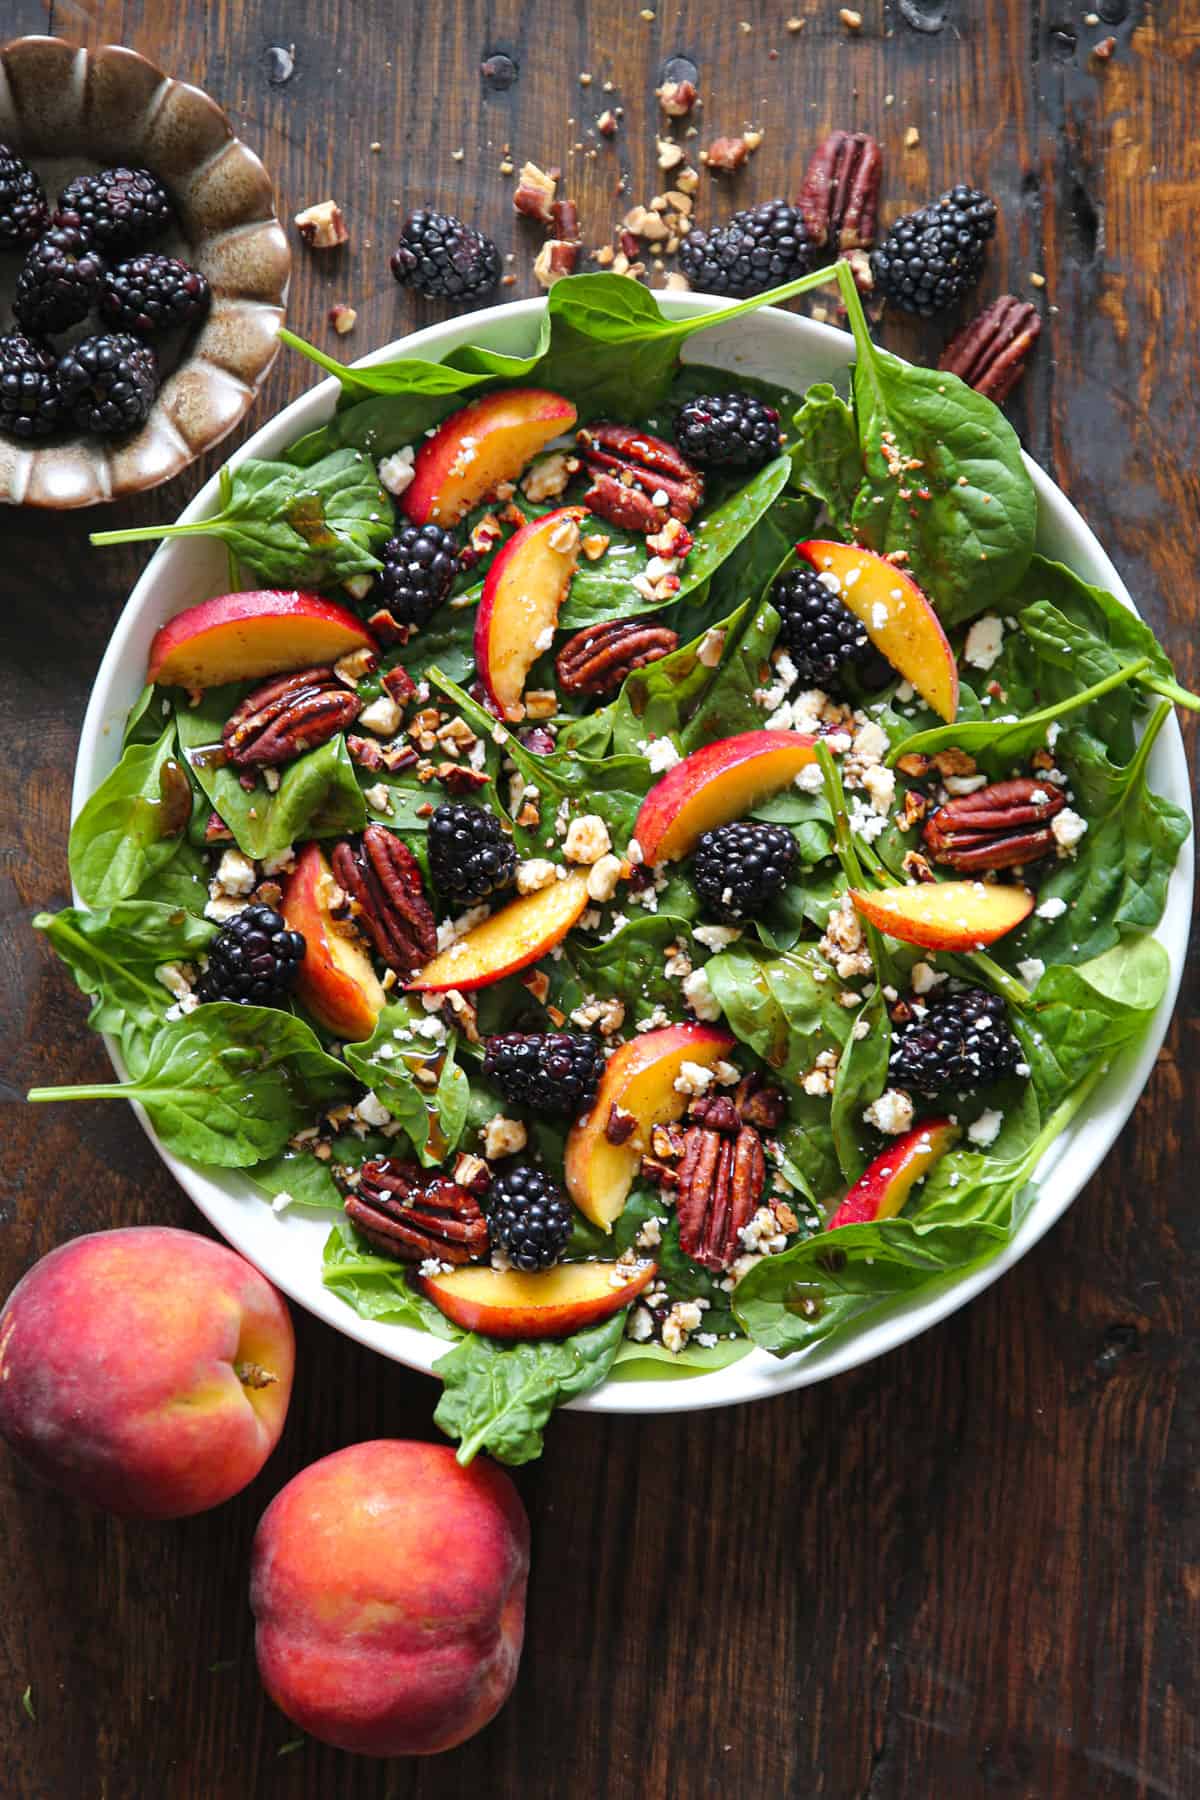 Summer Peach Spinach Salad with Blackberries, Pecans, Feta, and Balsamic Glaze - in a white bowl.